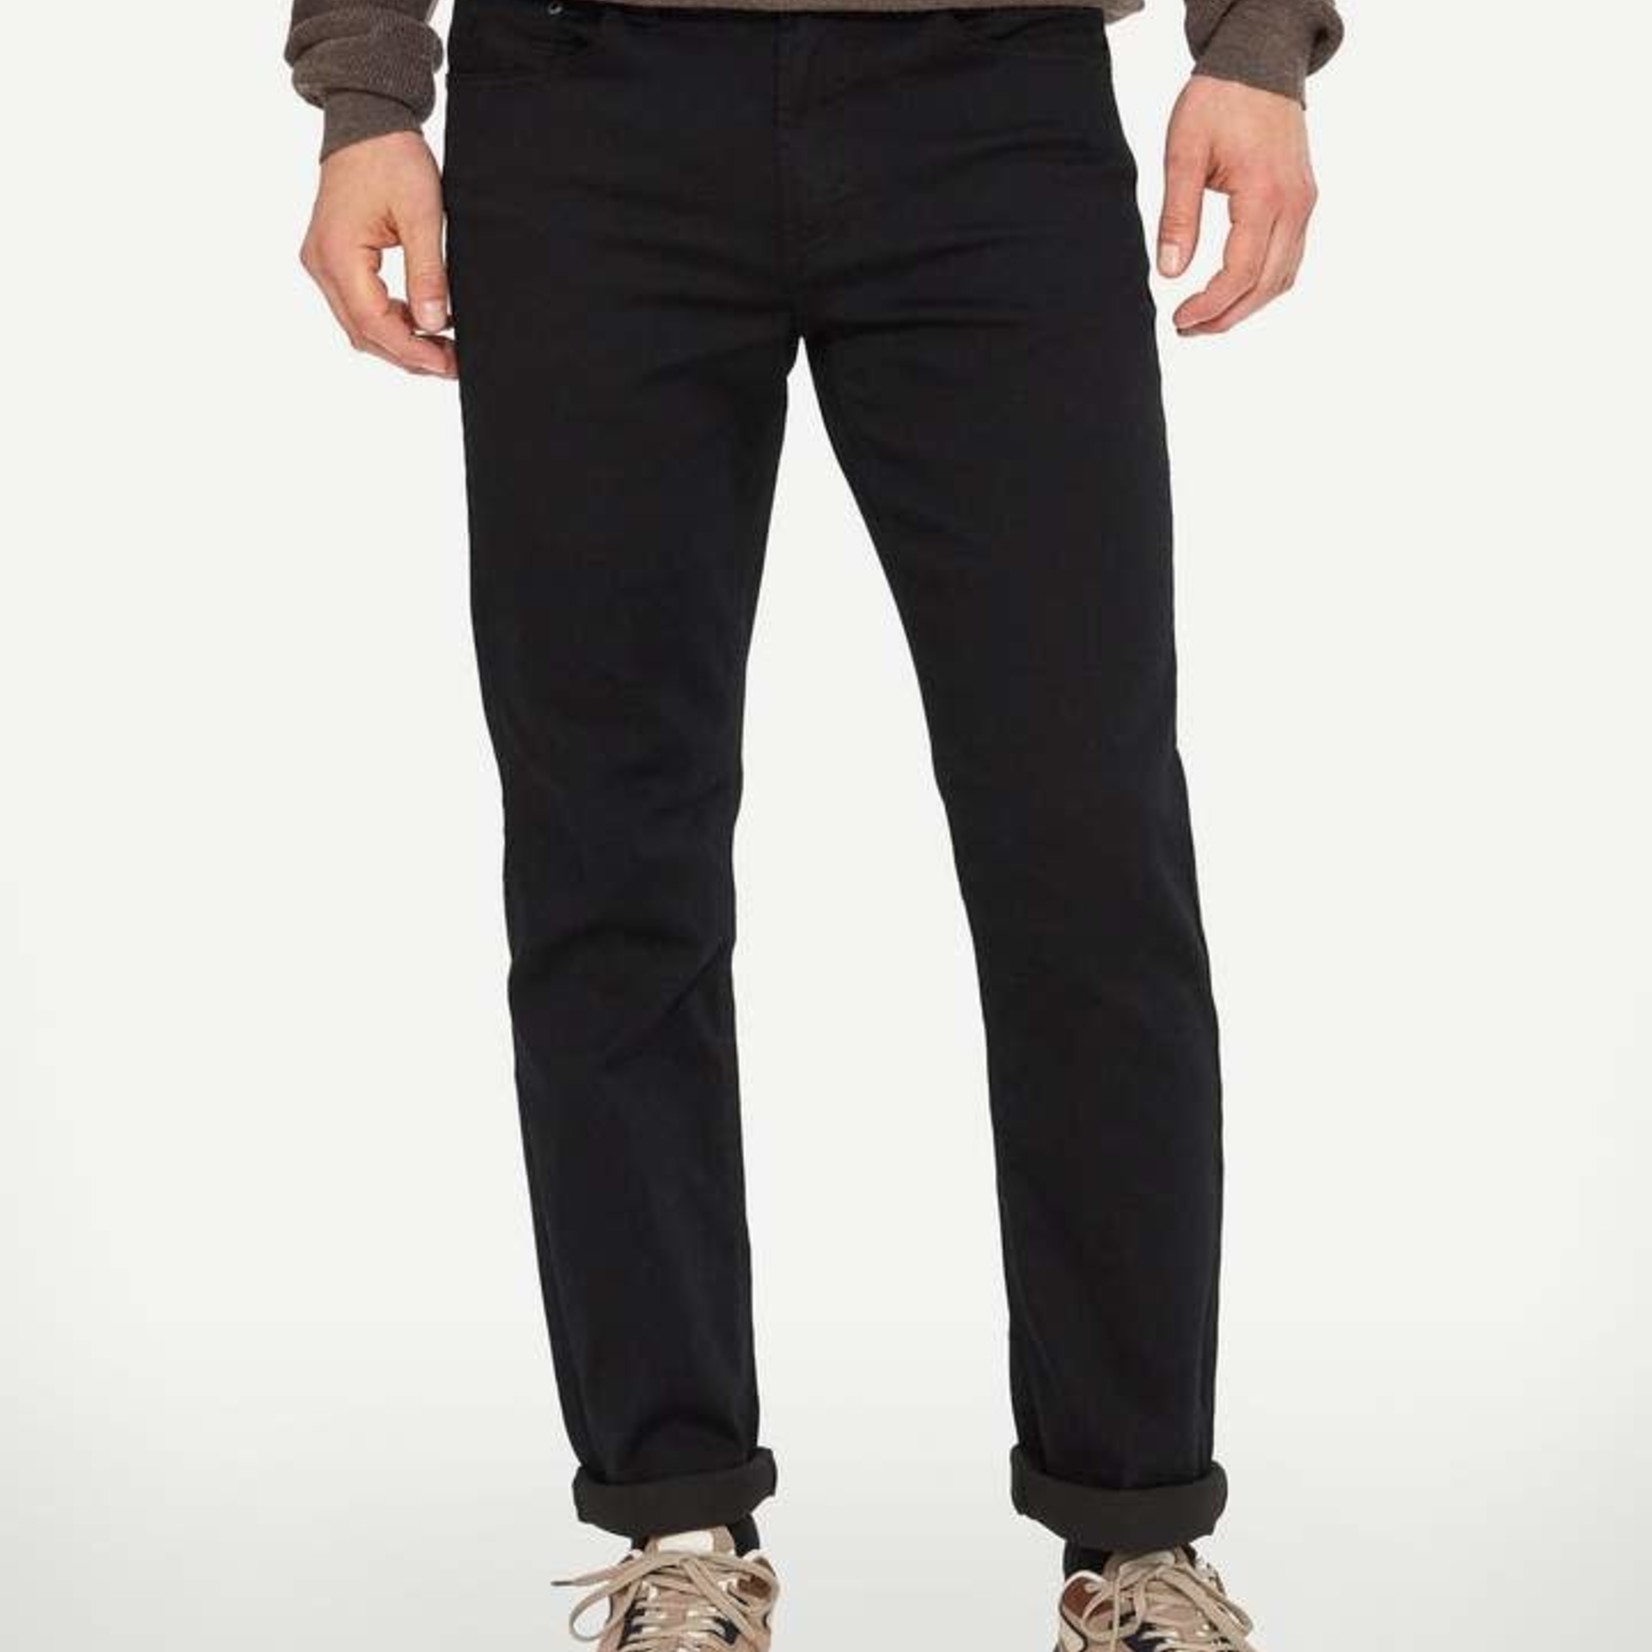 Lois Jeans Canada The "Brad Slim 6240-99" by Lois Jeans